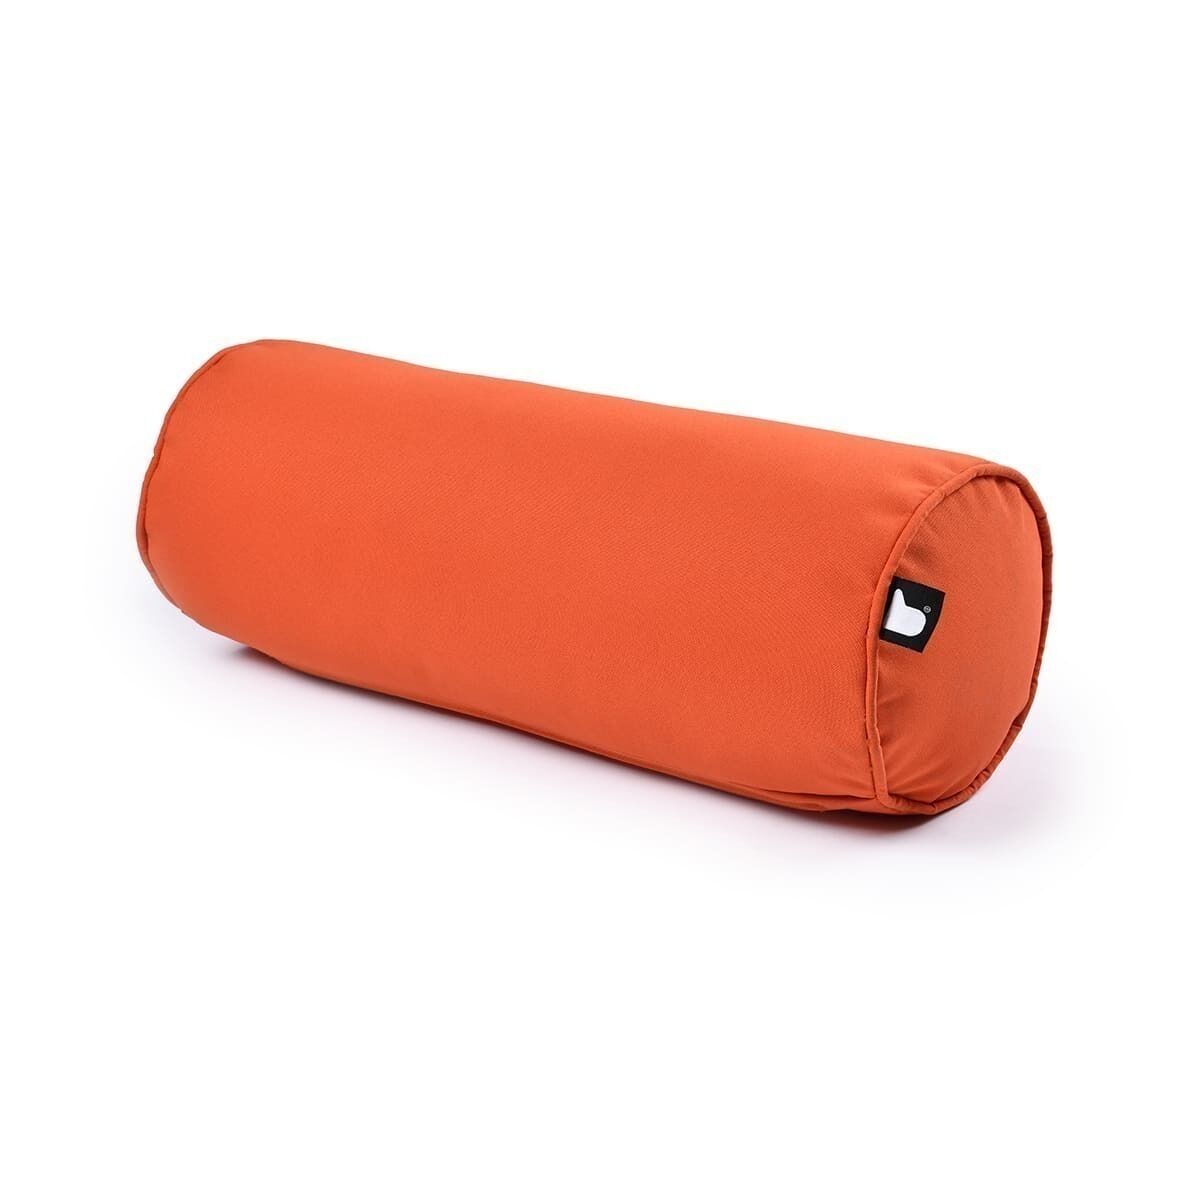 Extreme Lounging - Outdoor Bean Bolster - Orange product image